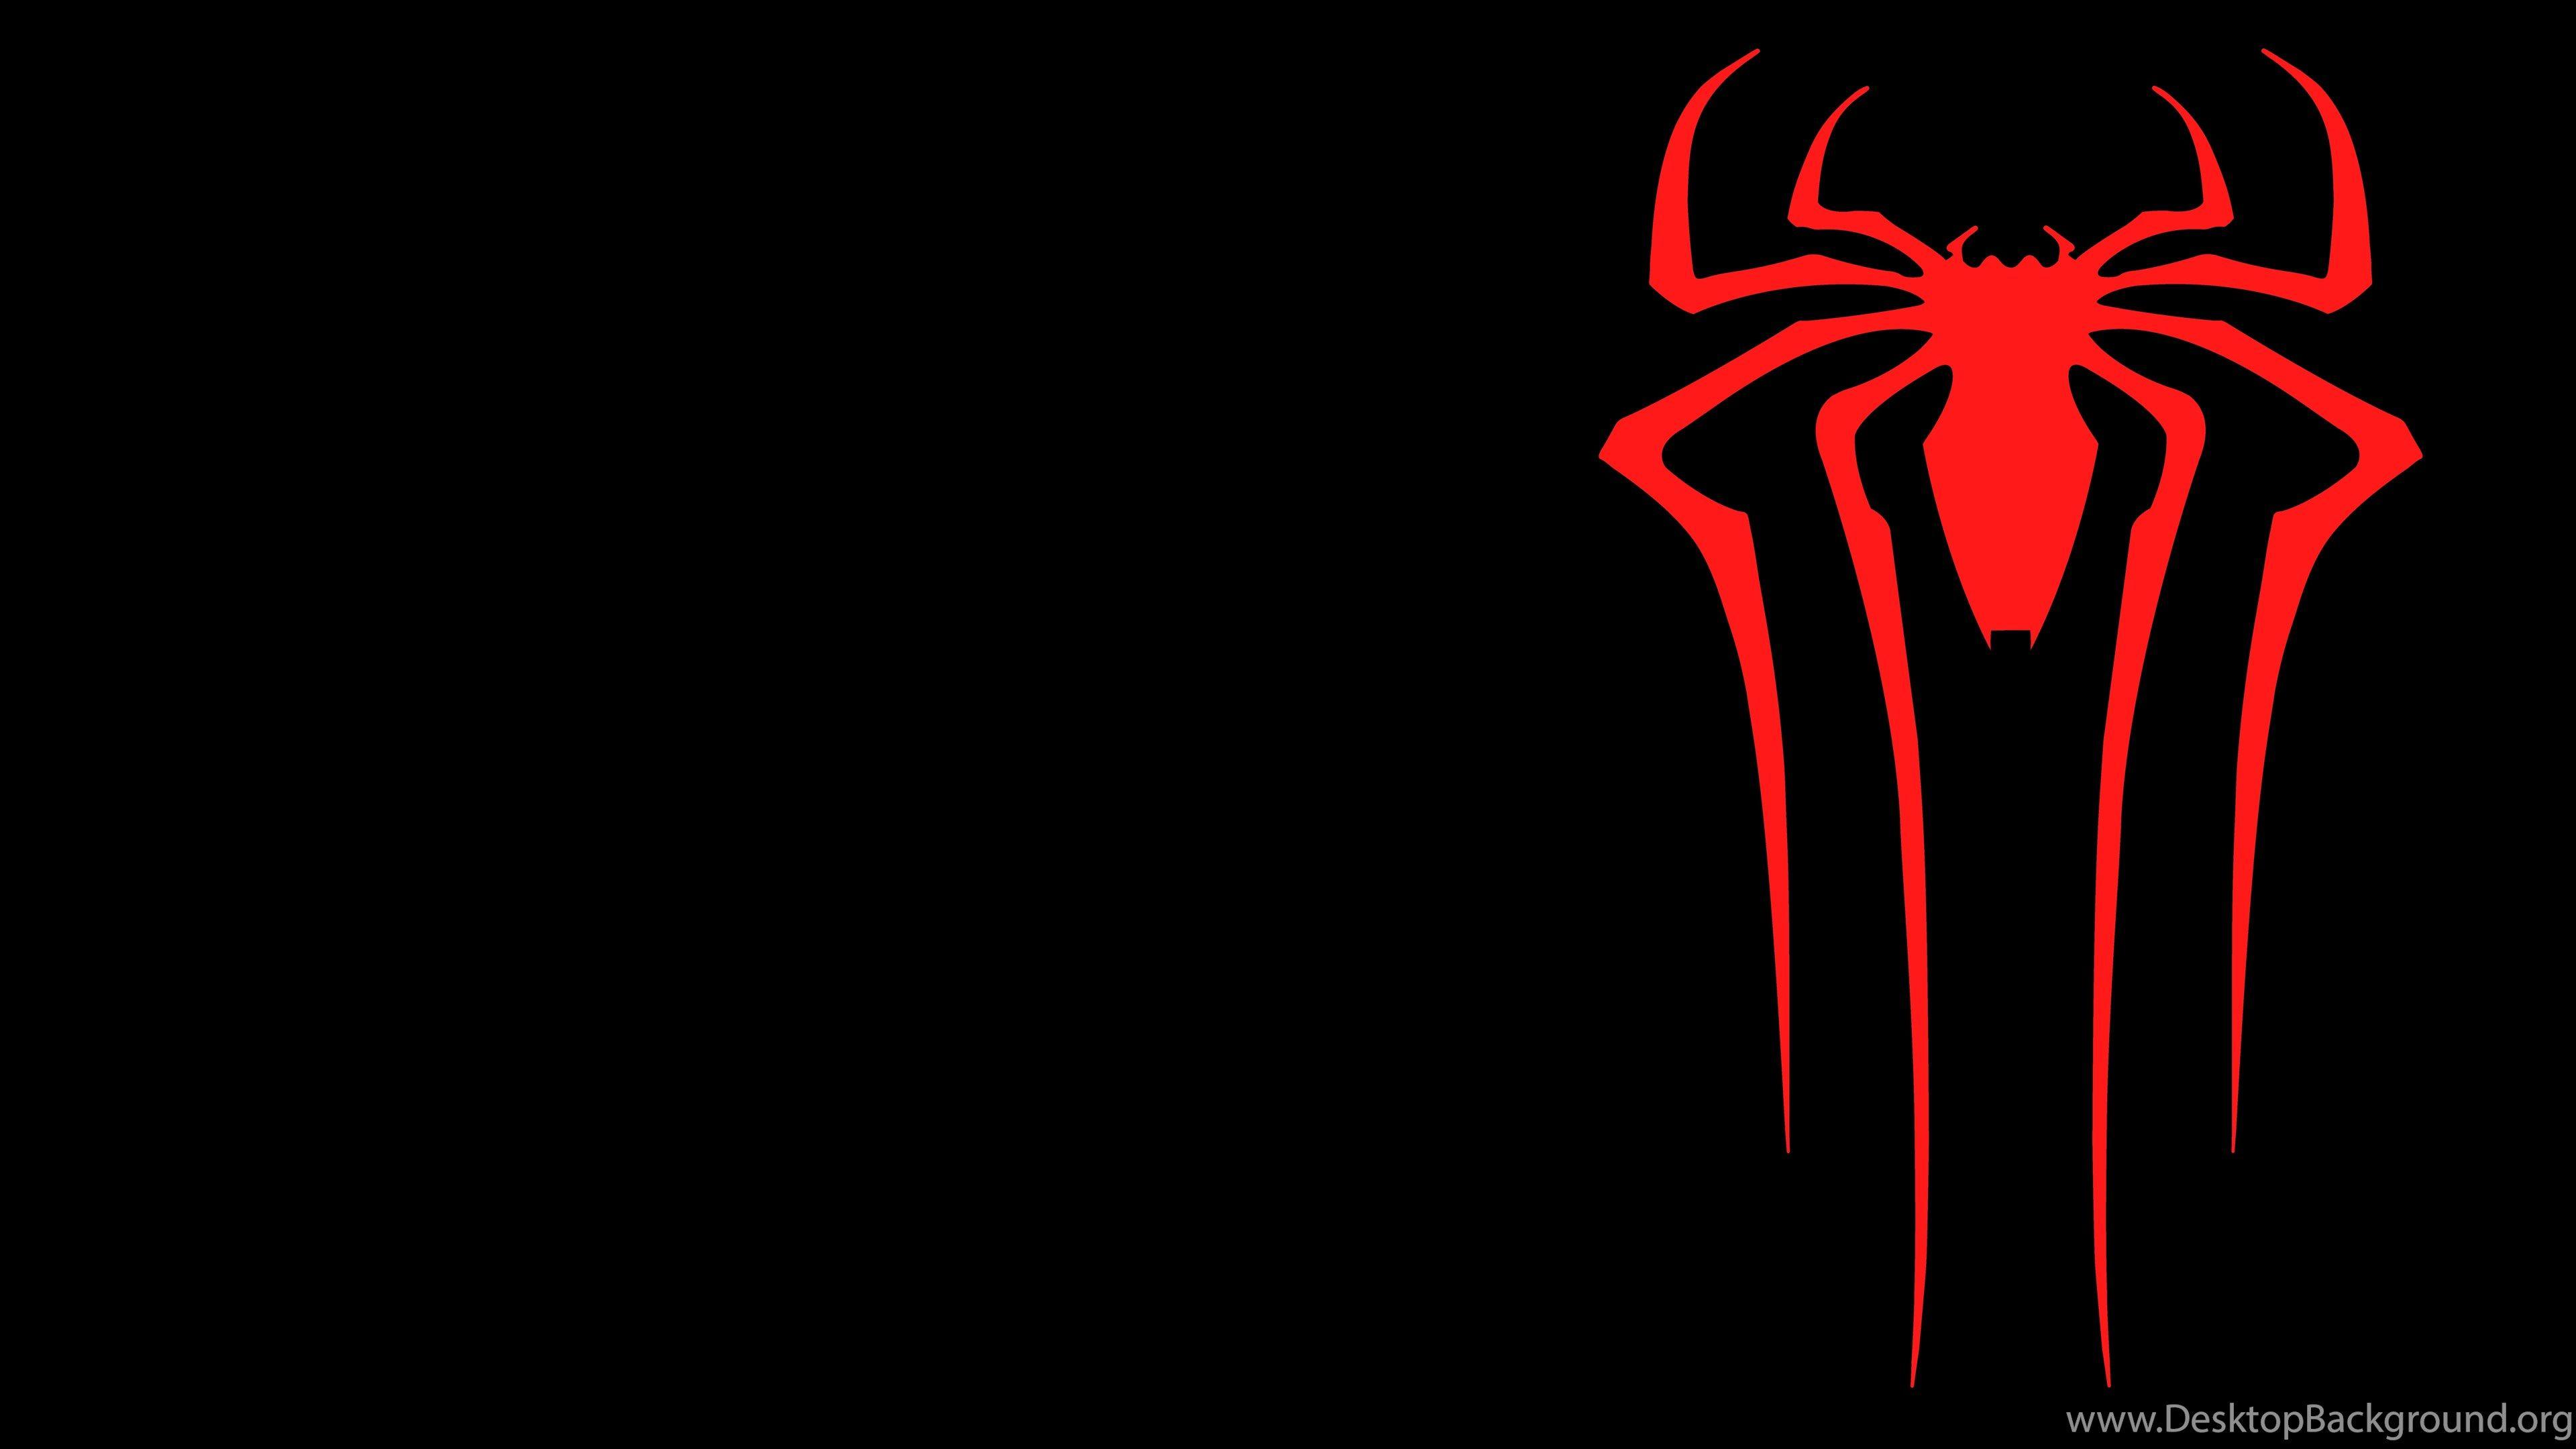 Other Wallpaper: Spiderman Logo Wallpaper Background HD Quality